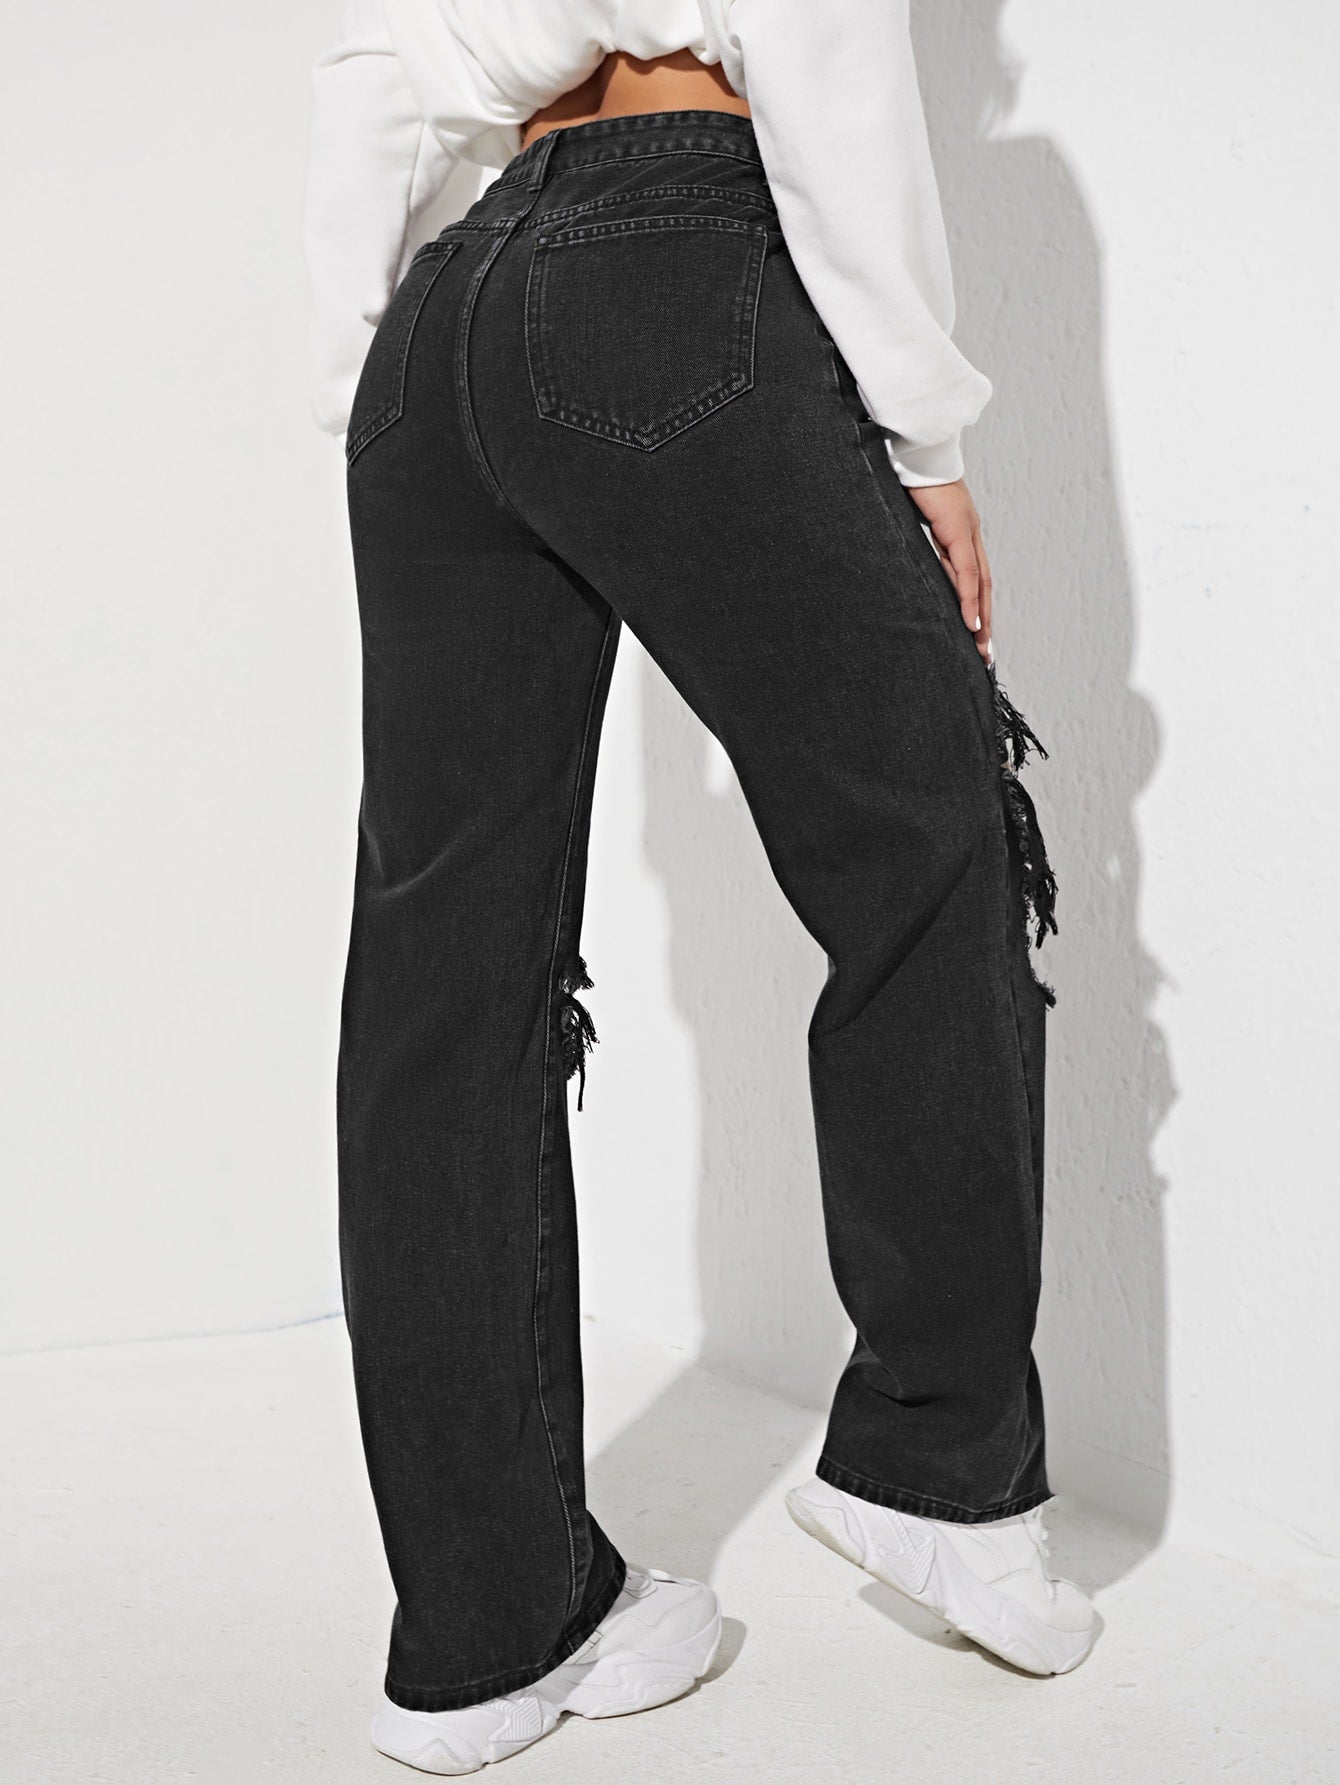 High Waist Ripped Cut Out Jeans